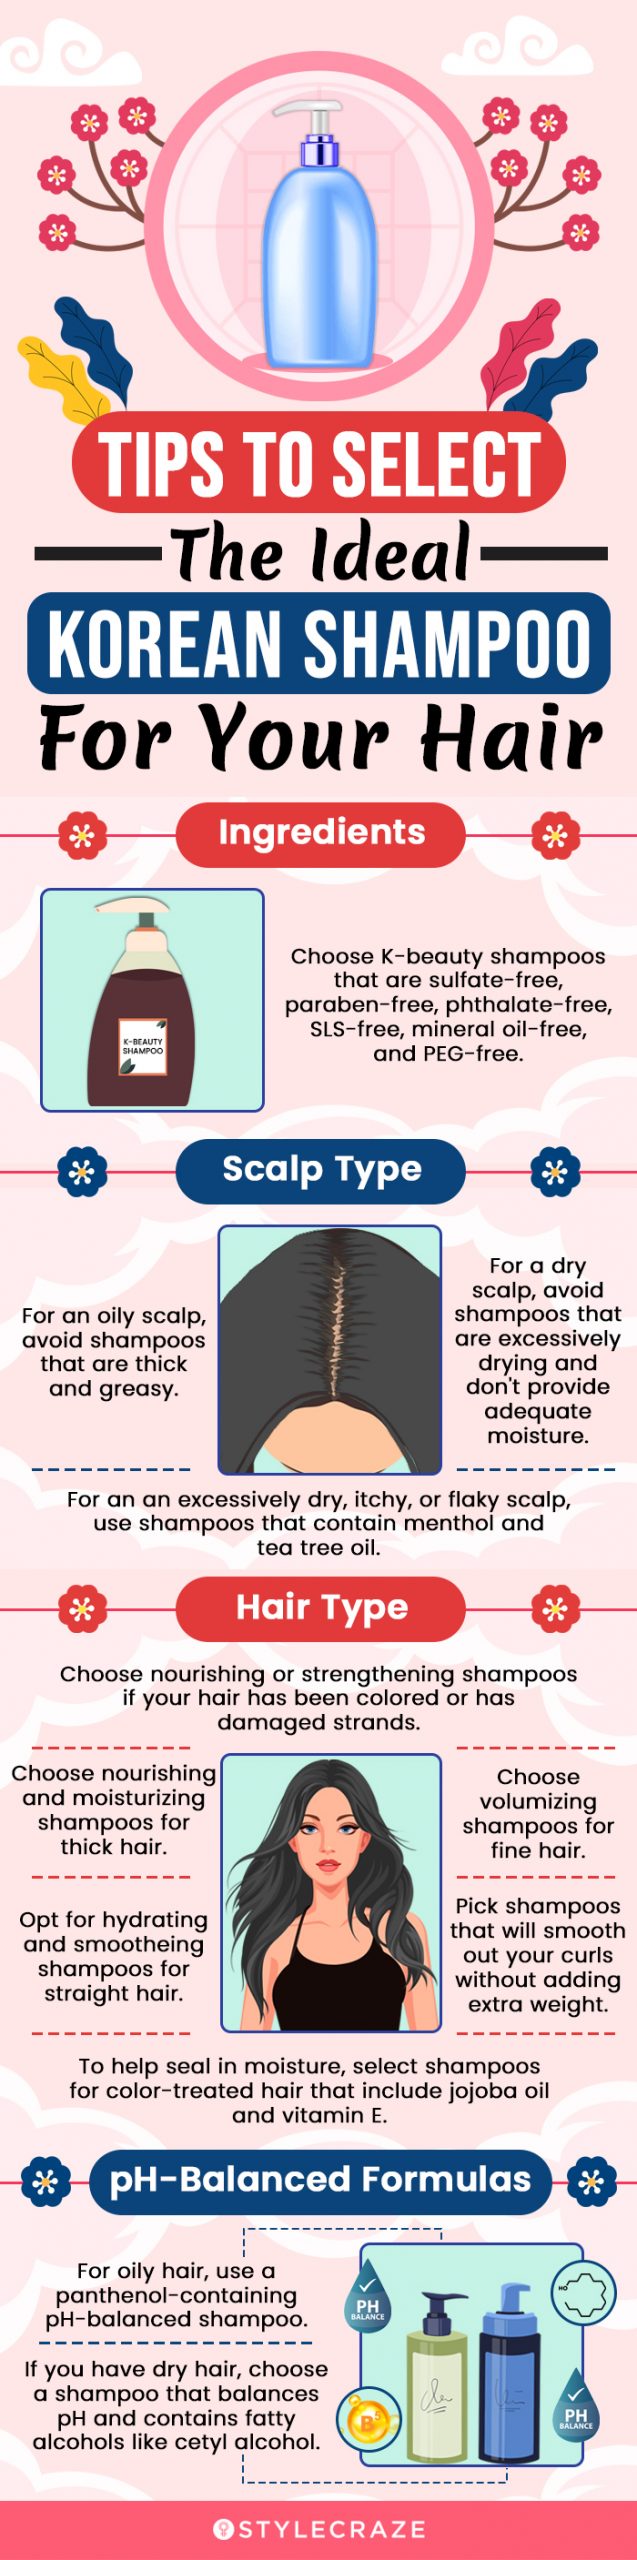 Things To Check When Buying The Ideal Korean Shampoo For Your Hair (infographic)